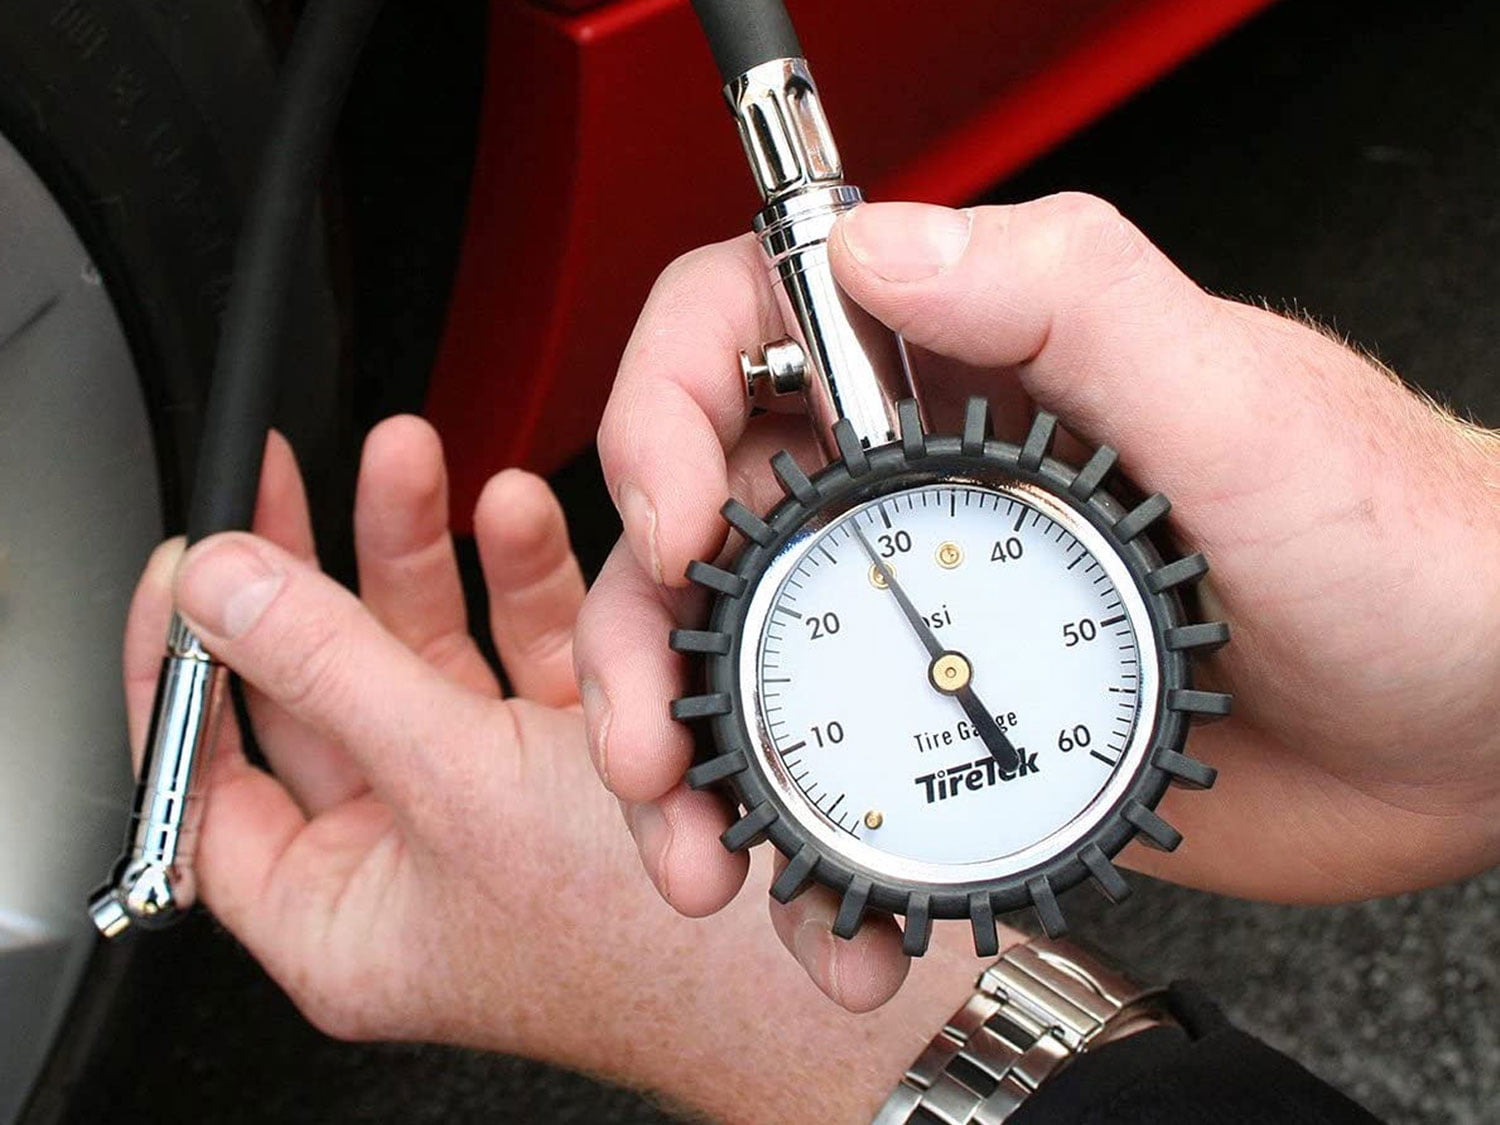 Checking tire pressure with a motorcycle tire-pressure gauge